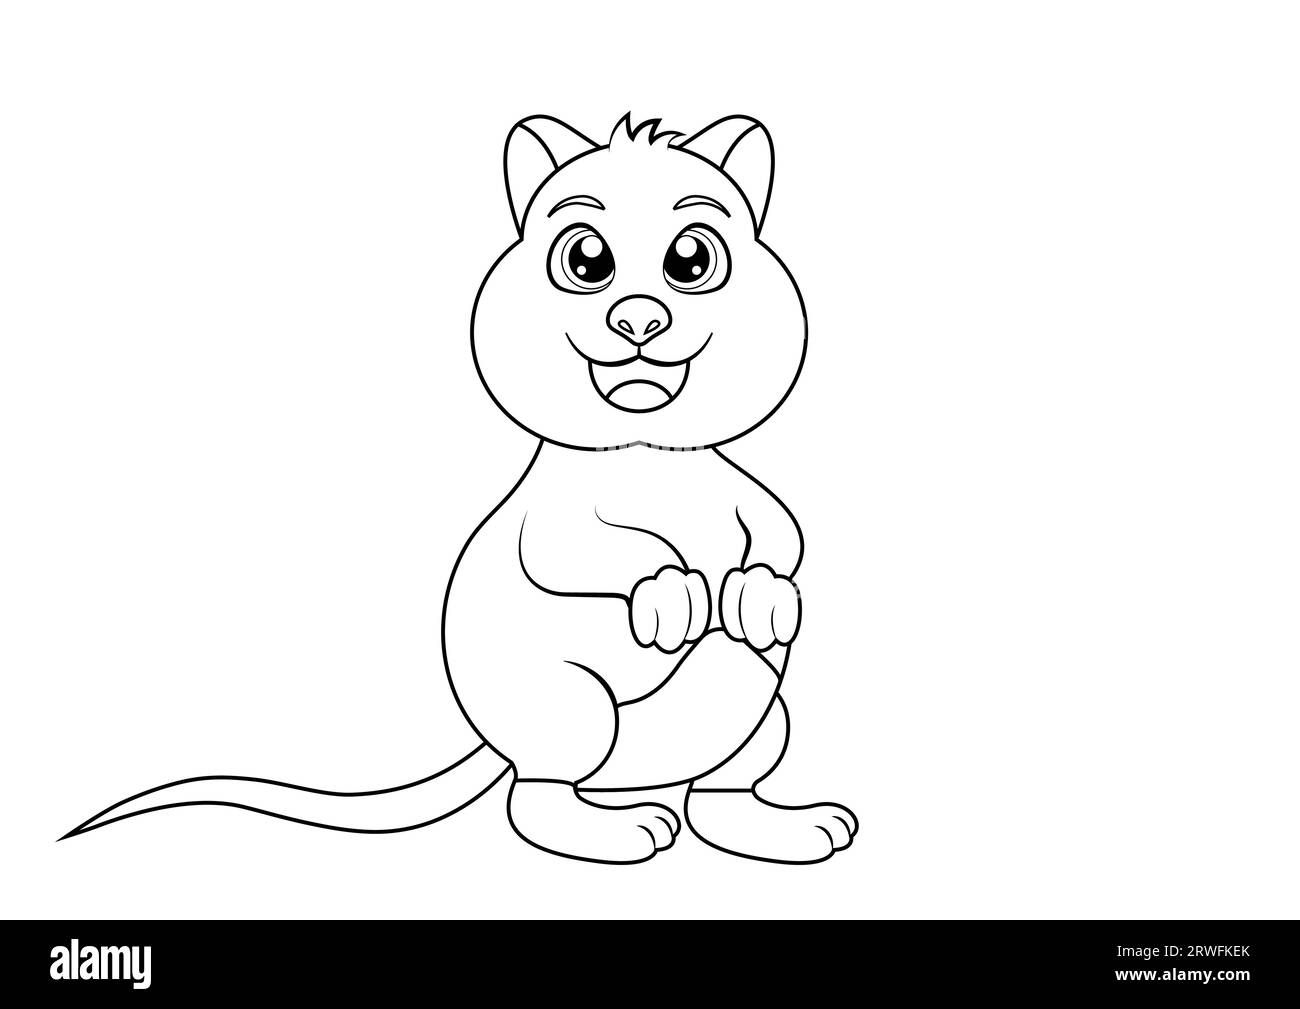 Coloring Page of a Cute Quokka Animal Cartoon Character Vector Stock Vector